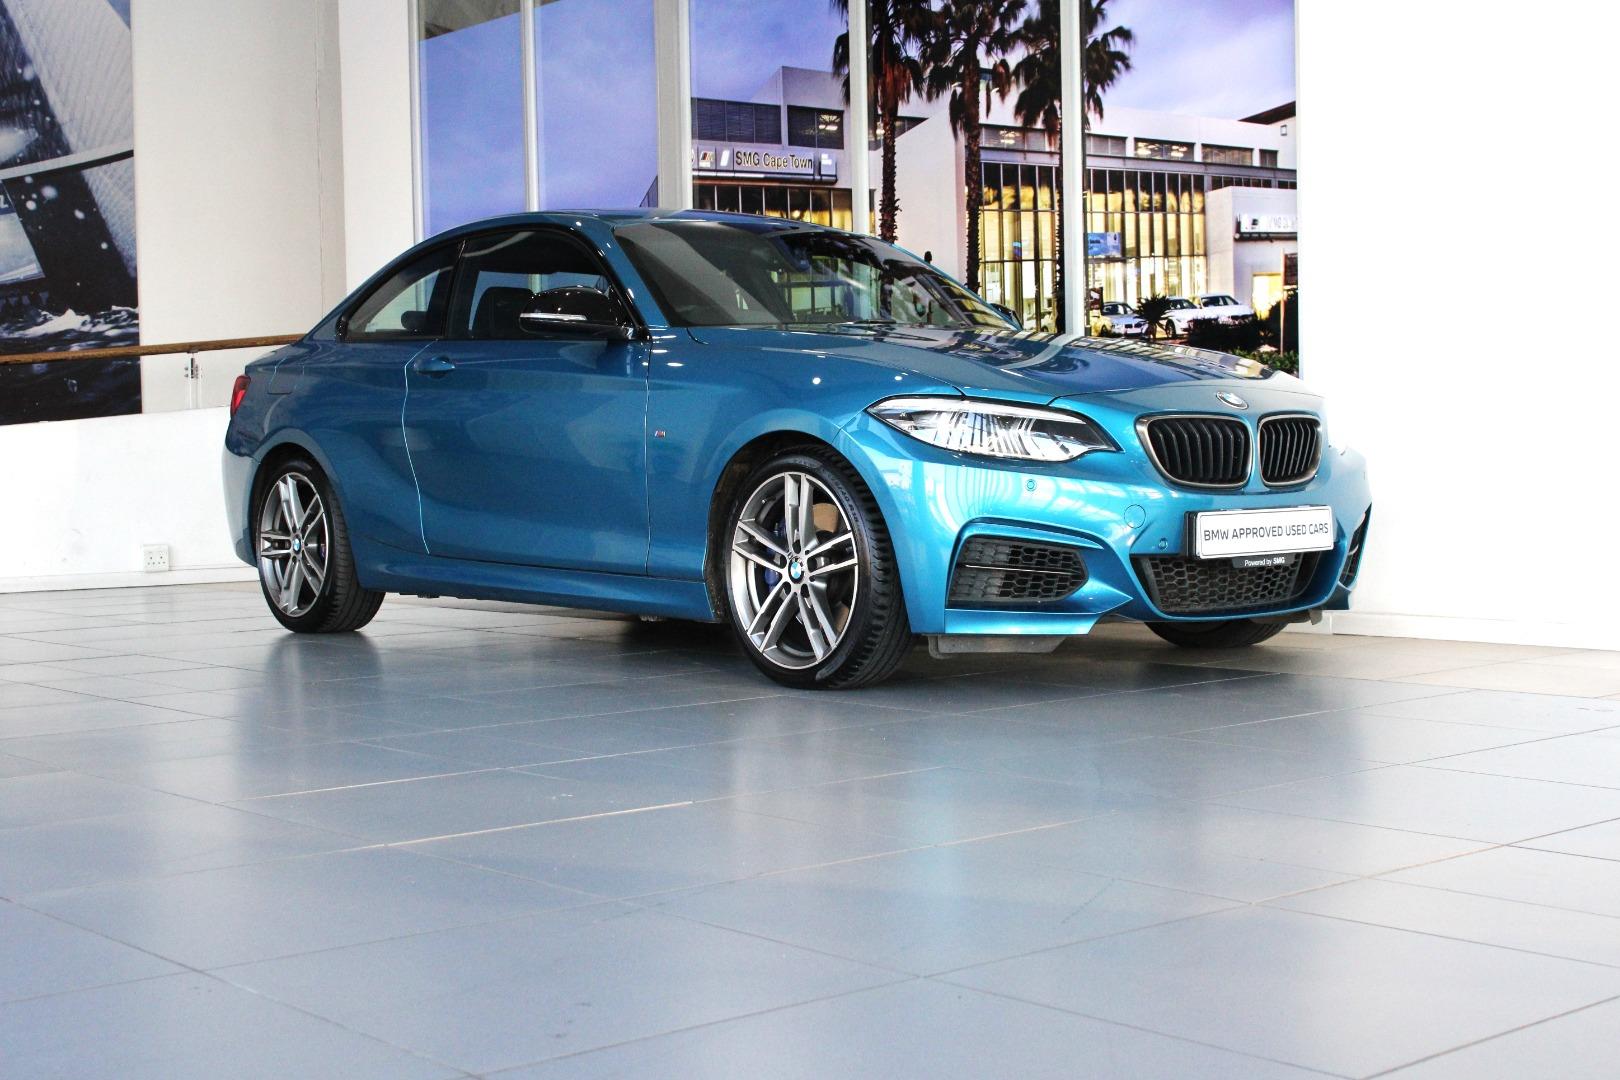 2019 BMW M240i AT (F22)  for sale - SMG12|USED|115416